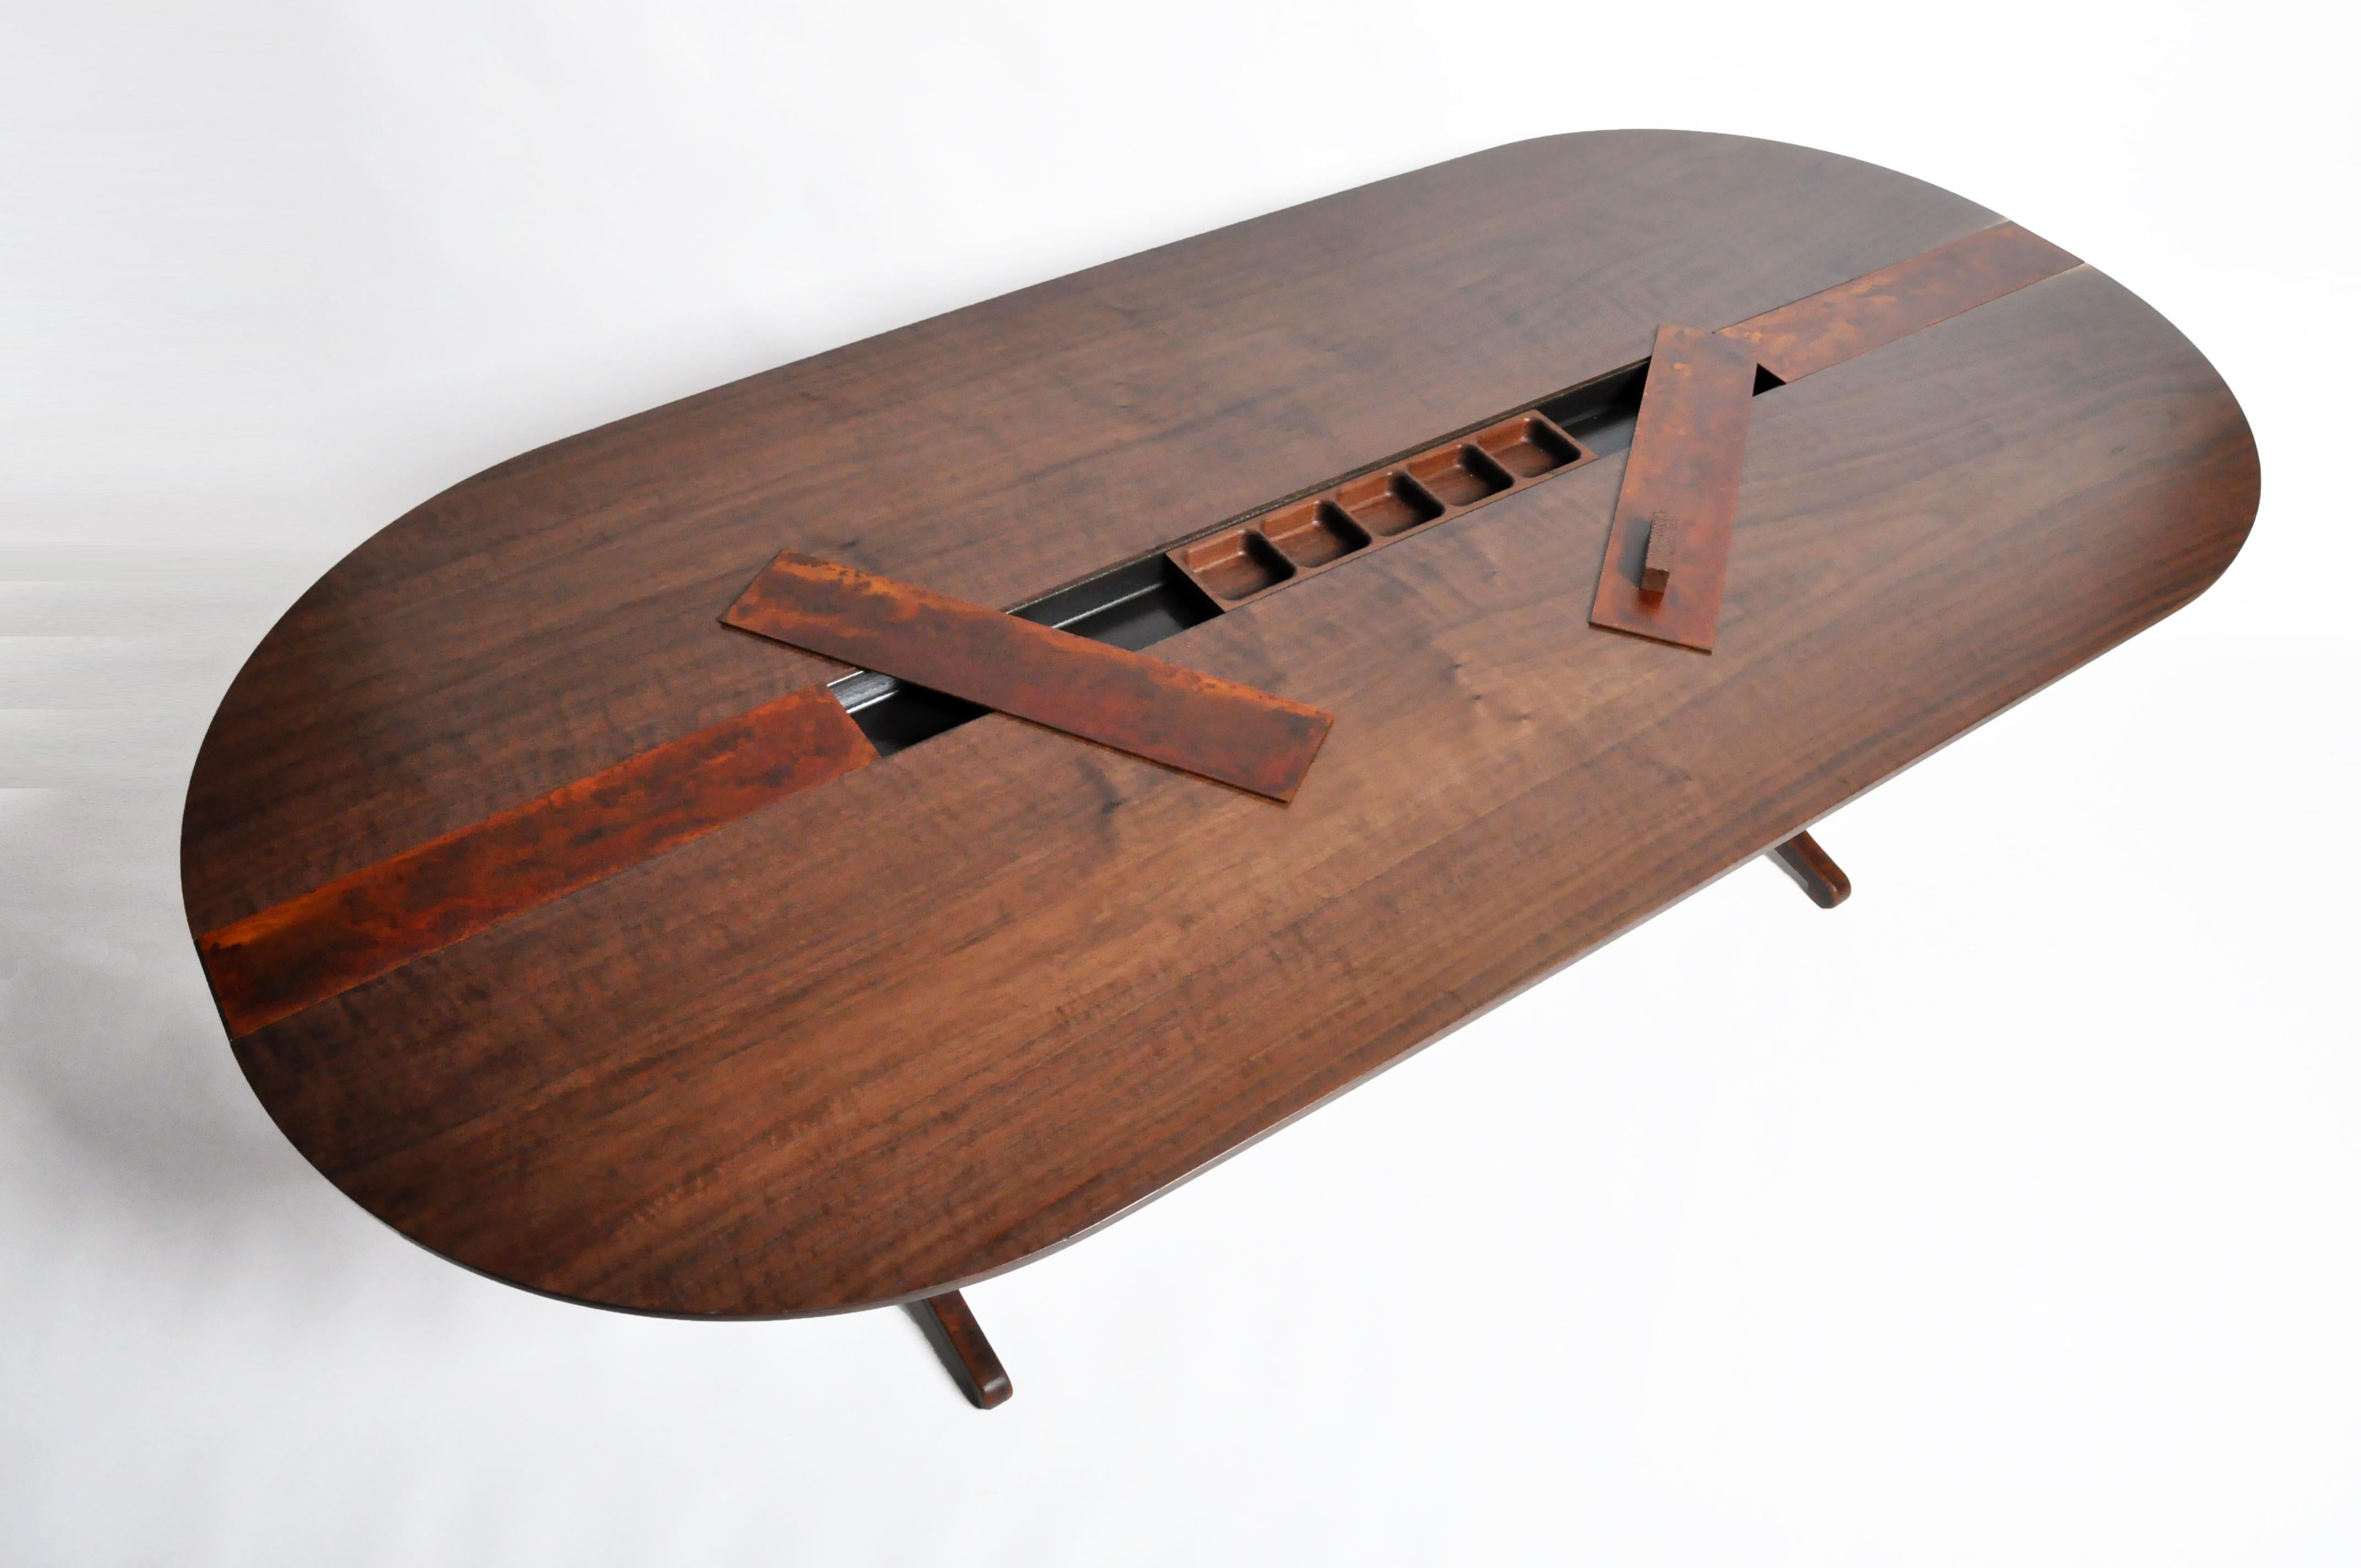 Walnut table by Modern Industry. Walnut wood and metal, 2019. On display at The Golden Triangle for our 30th Anniversary Celebration and Global Best. Born in Minneapolis, Minnesota, Jacob Wener began woodworking at a very young age. He never stopped